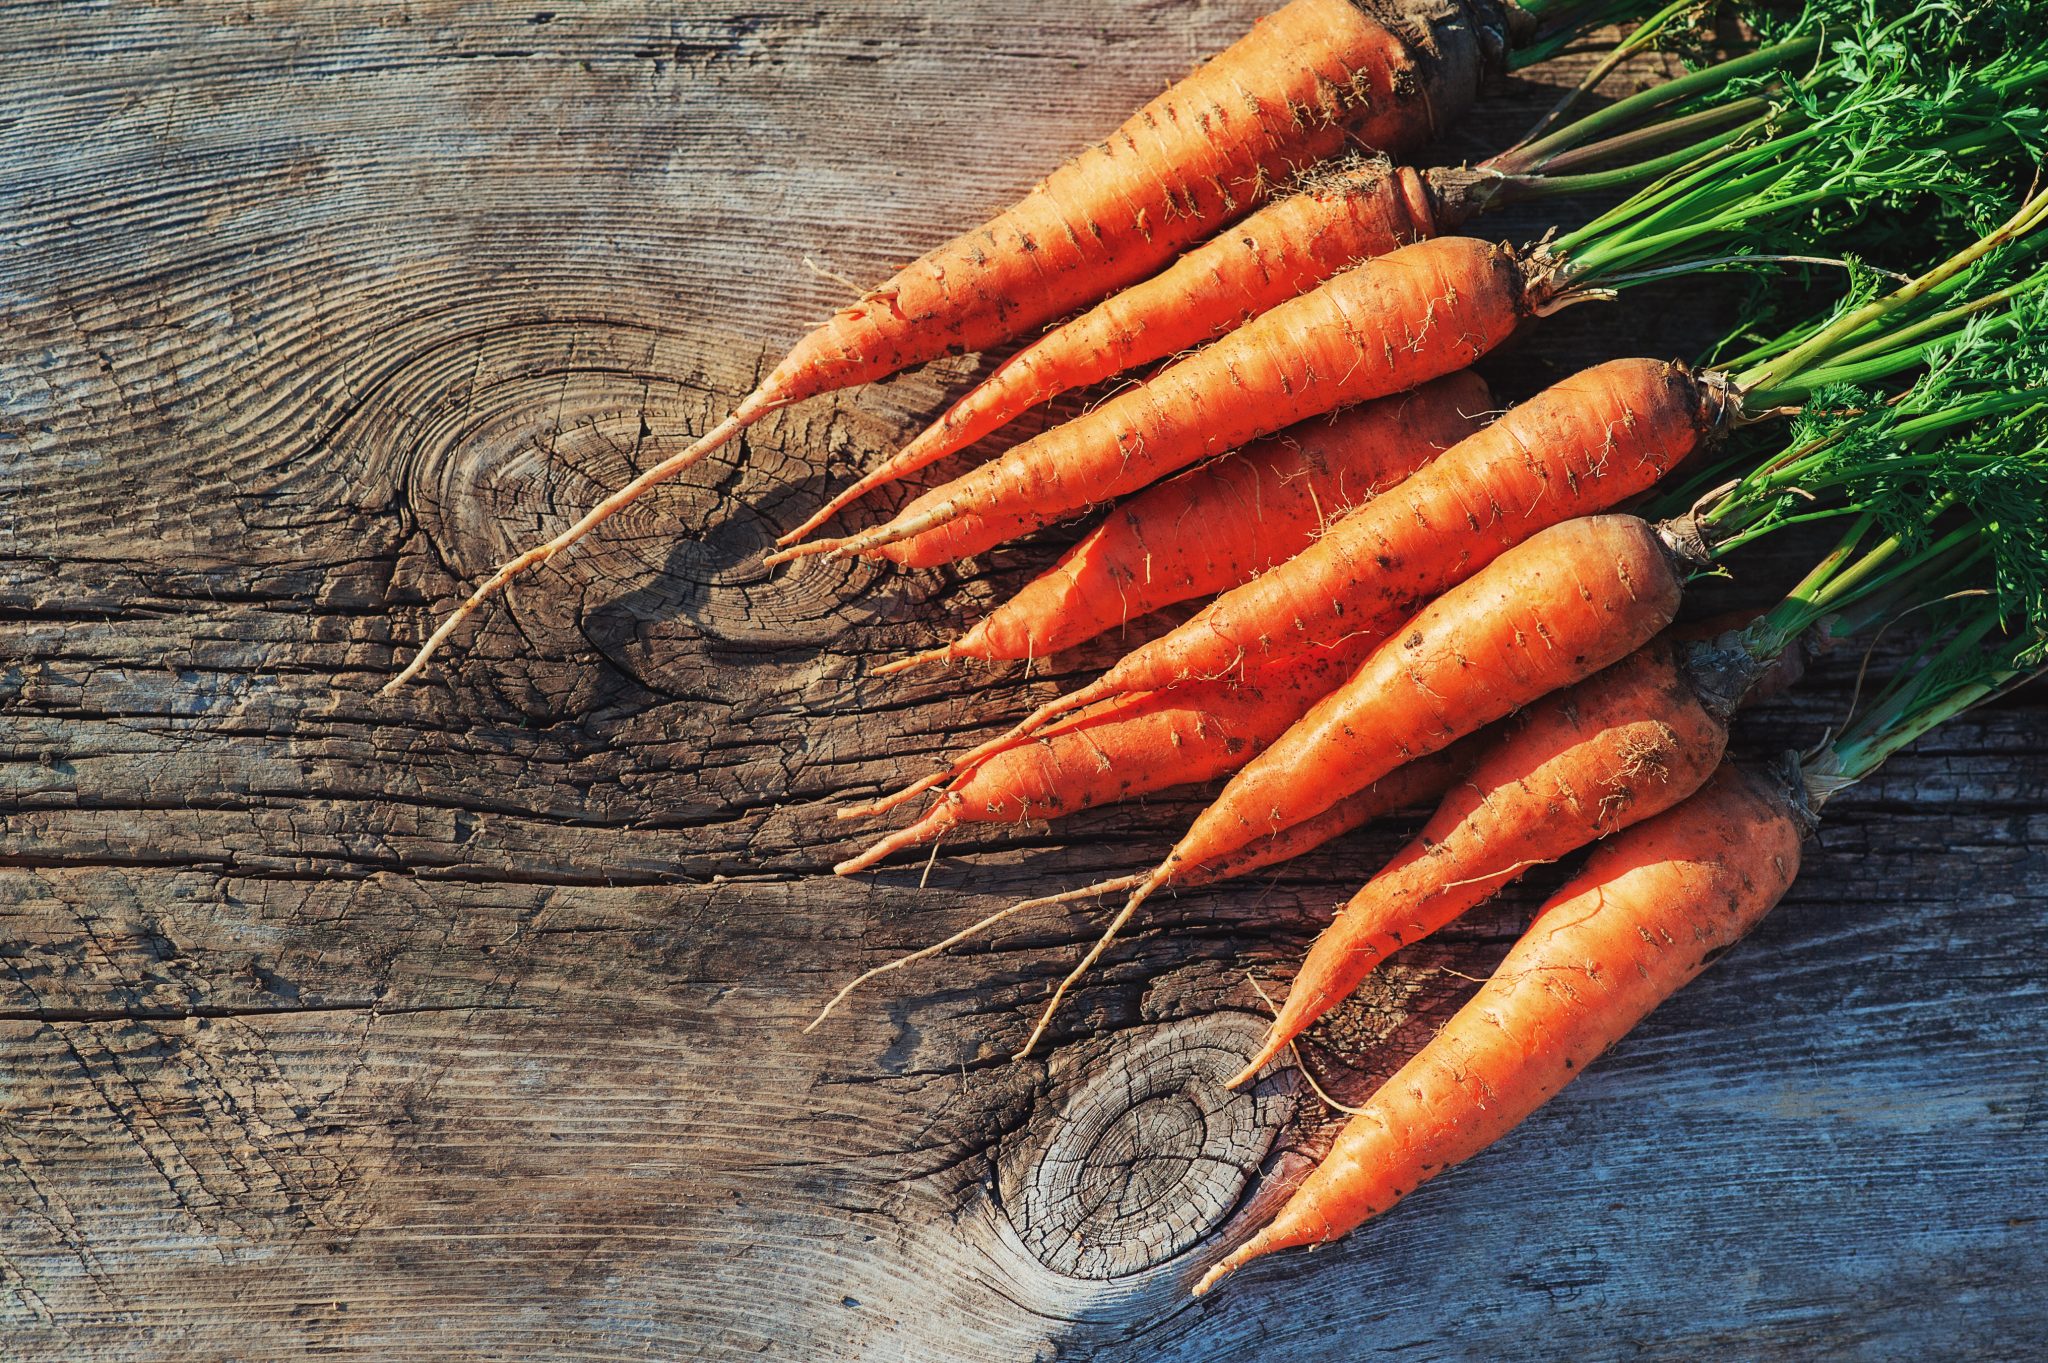 How Long Do Carrots Last? Can They Go Bad? - Gluten Free Club